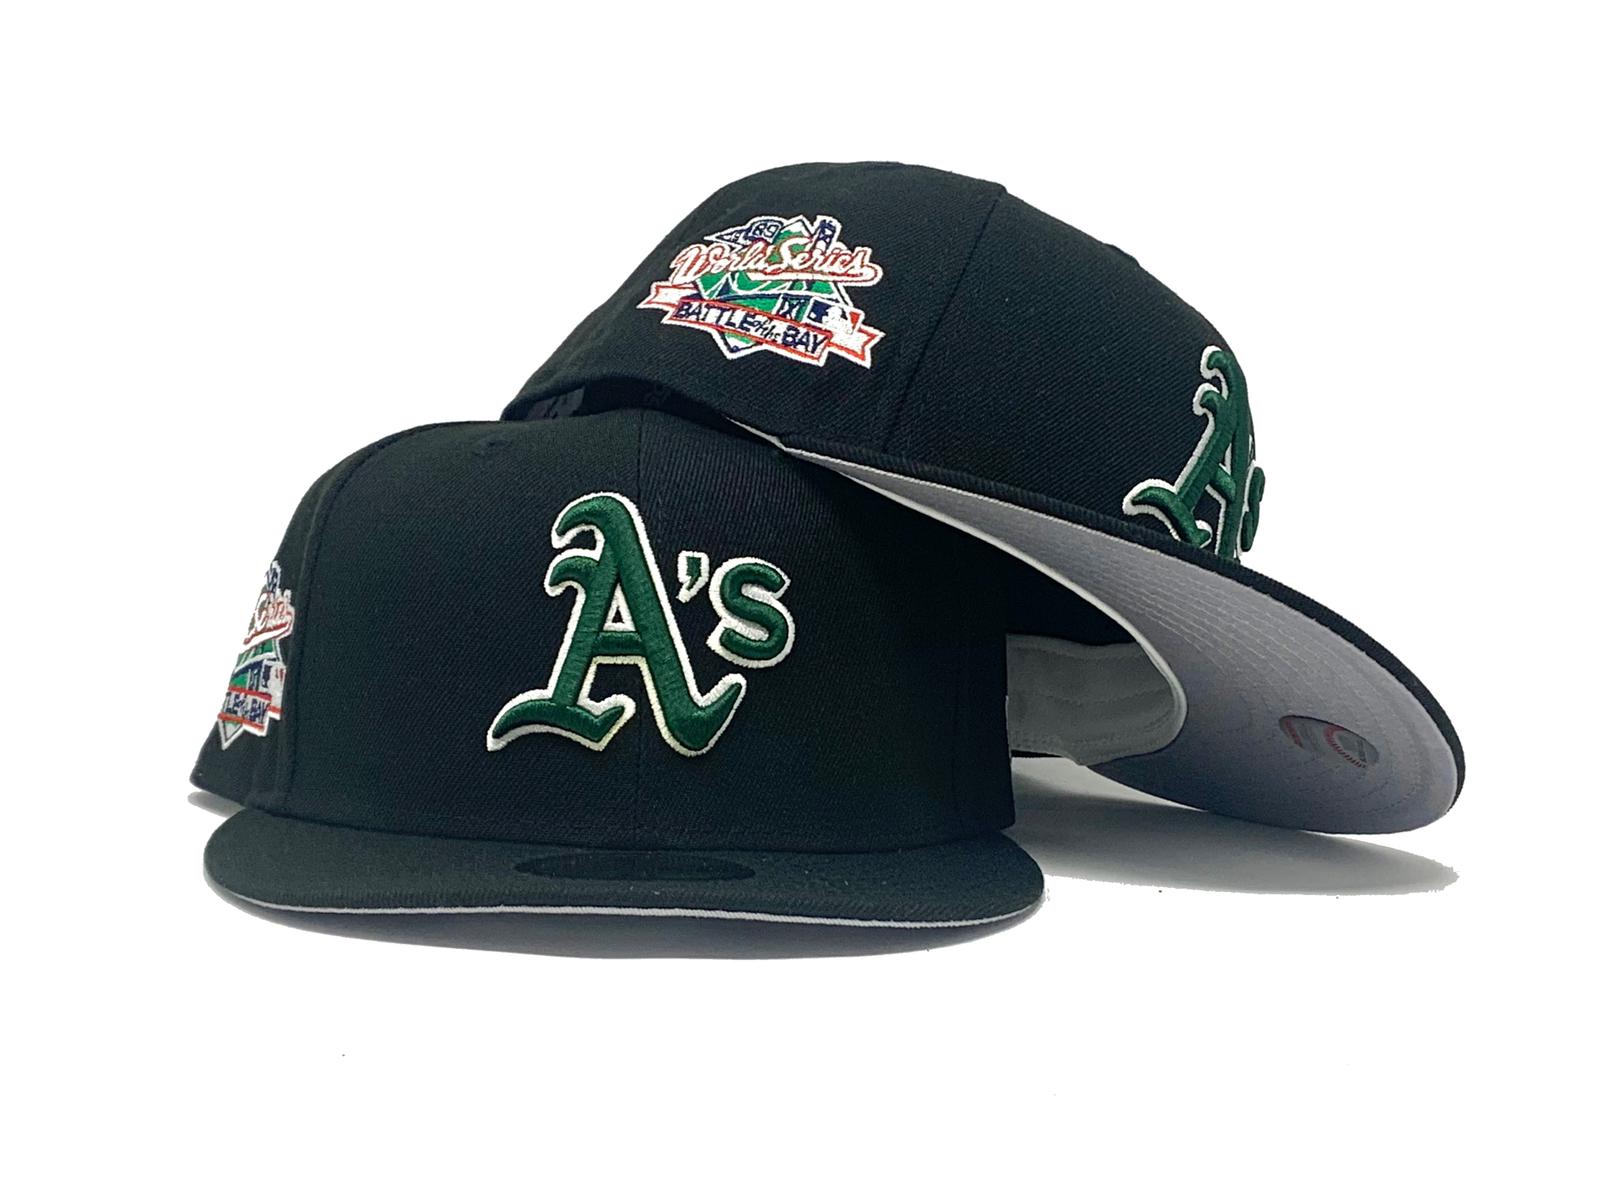 OAKLAND ATHLETICS 1989 BATTLE OF THE BAY GRAY BRIM NEW ERA FITTED HAT ...